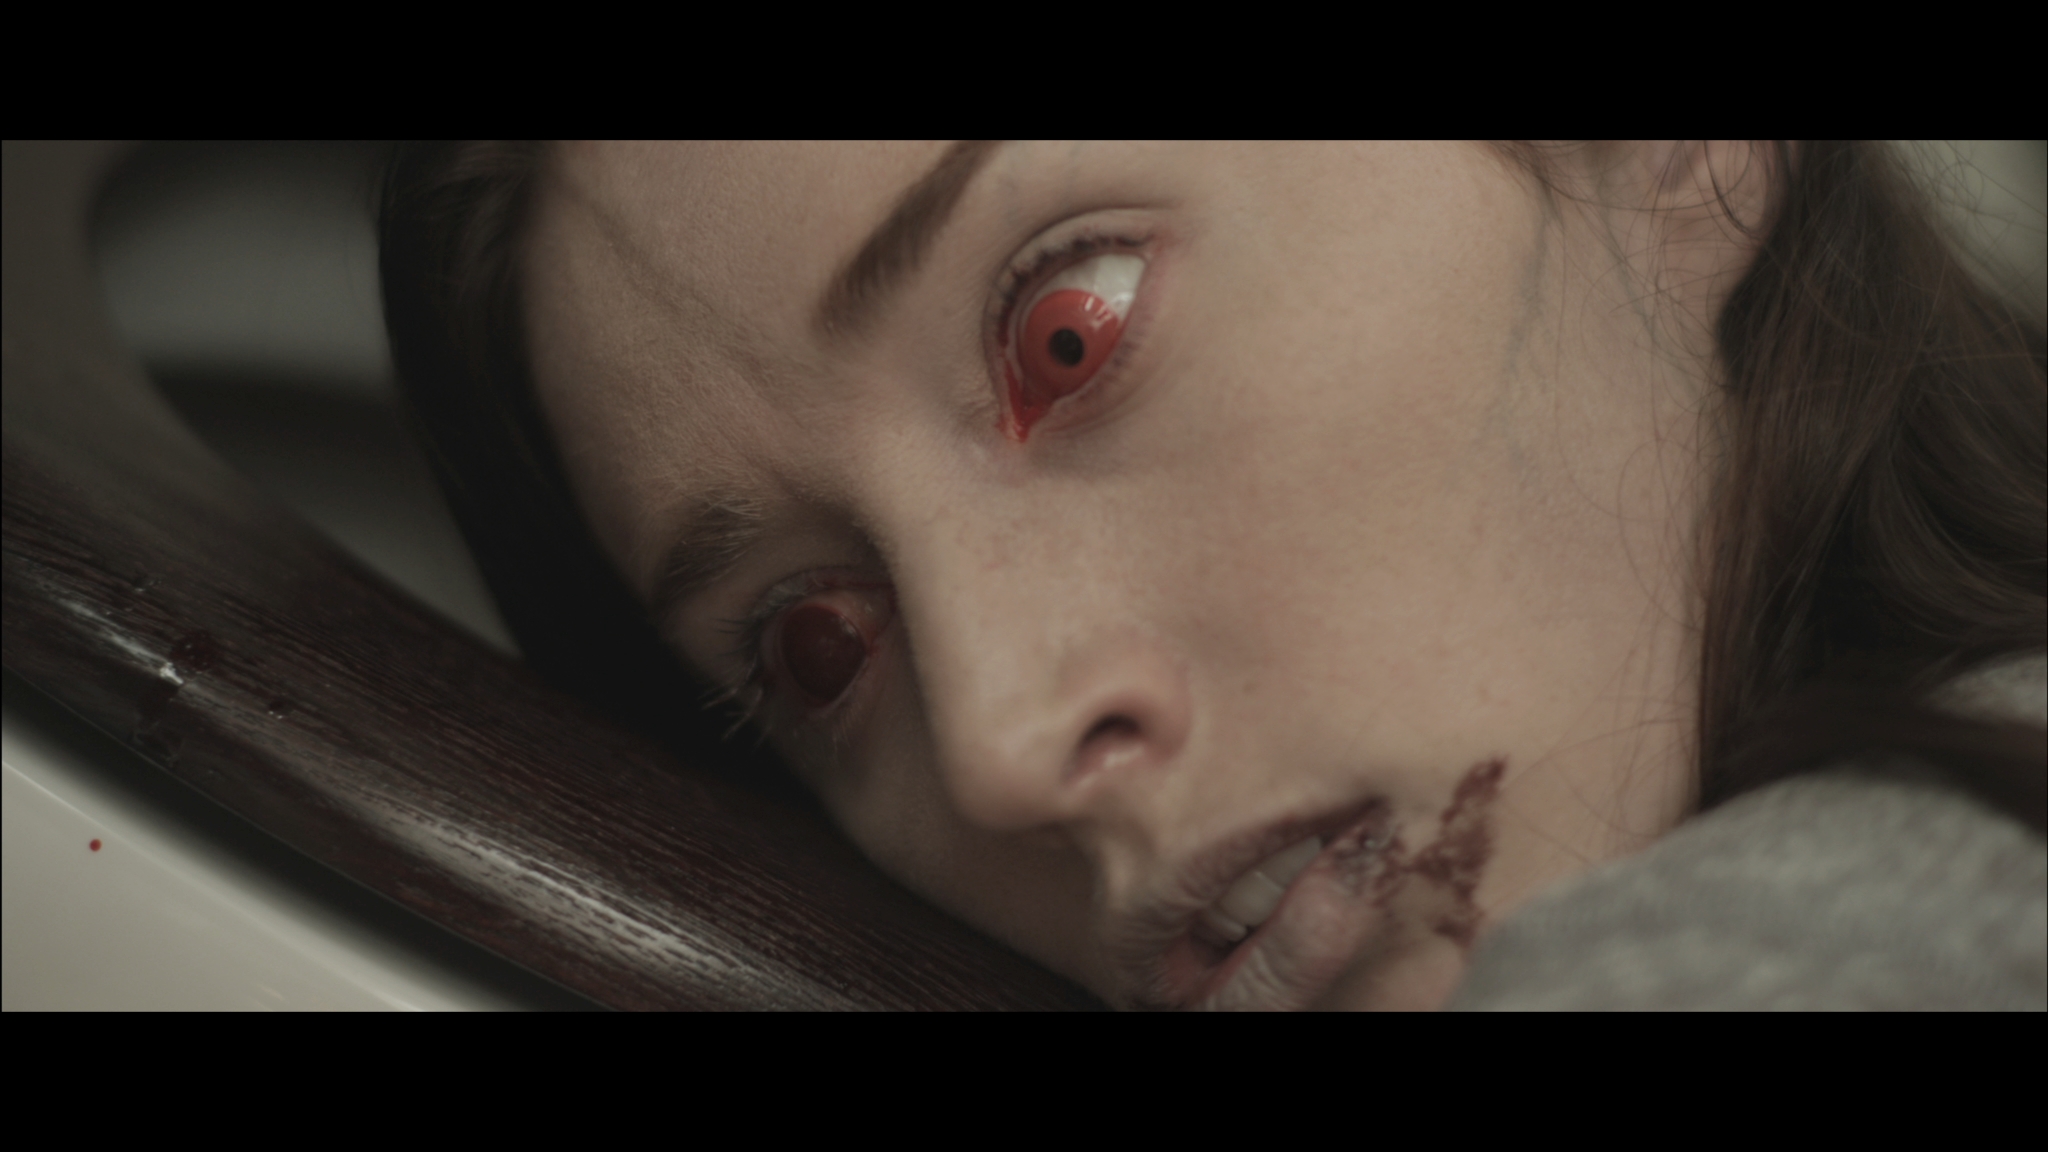 'Contracted' Trailer Can't Cover Up the Scars... - Bloody Disgusting